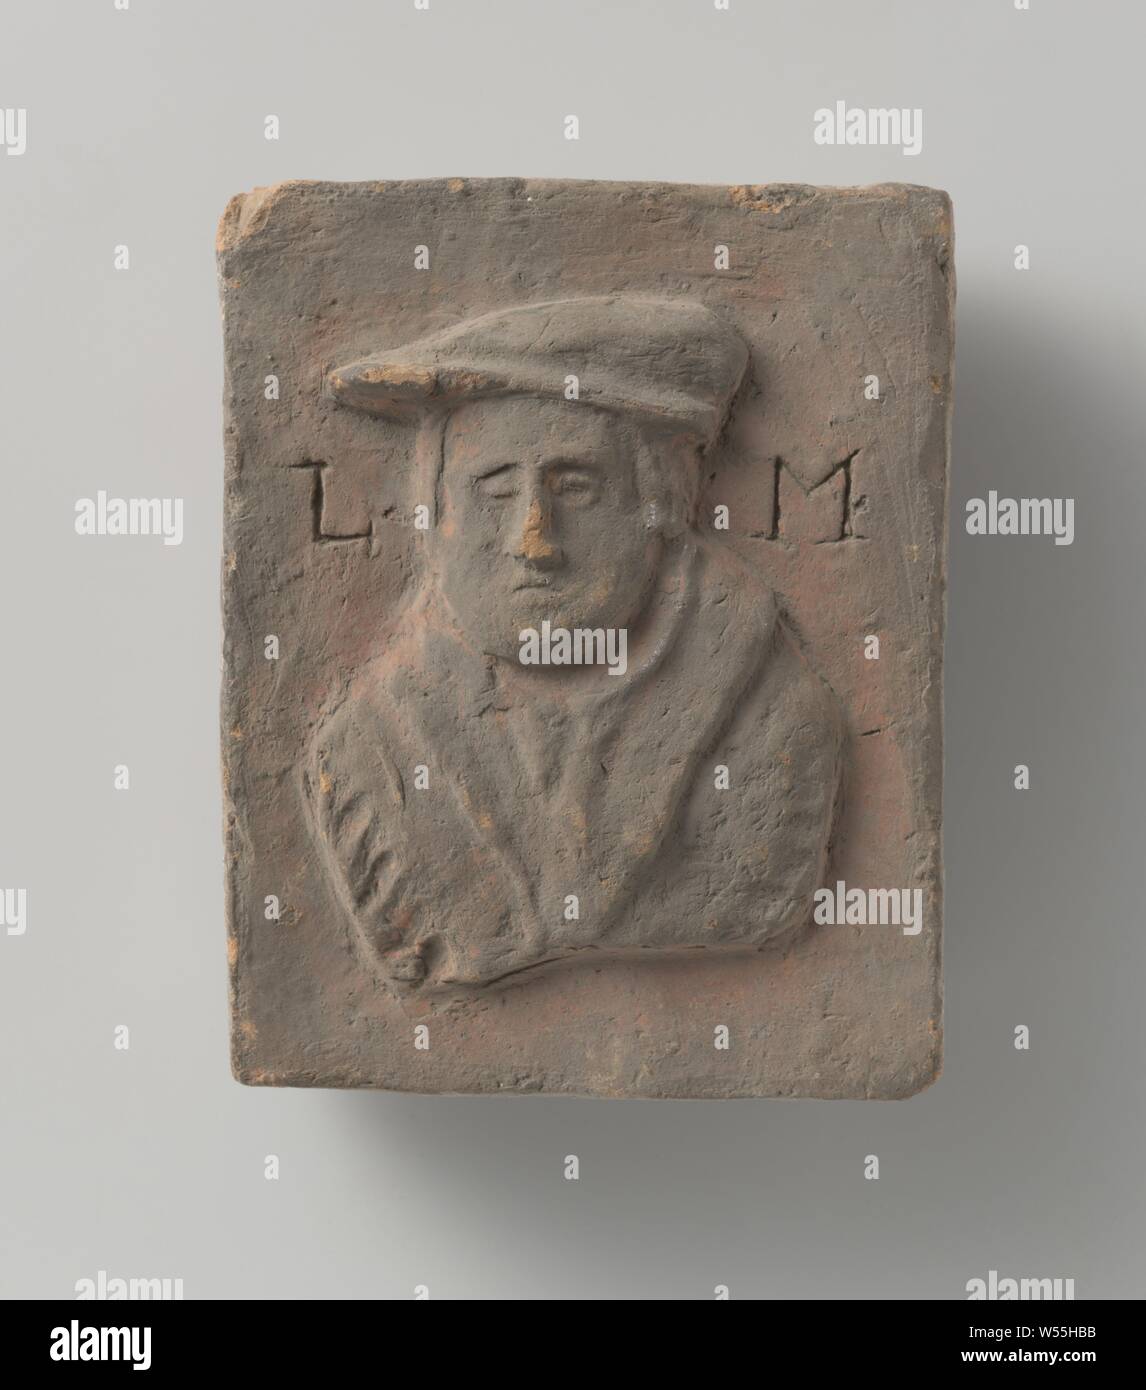 Tile with a representation of Martin Luther Tile with a representation of Martin Luther, Tegel with a representation of Martin Luther and the letters: L.M, Martin Luther, anonymous, Luik, c. 1550 - c. 1650, earthenware, h 13.0 cm × w 10.5 cm × t 4.0 cm Stock Photo